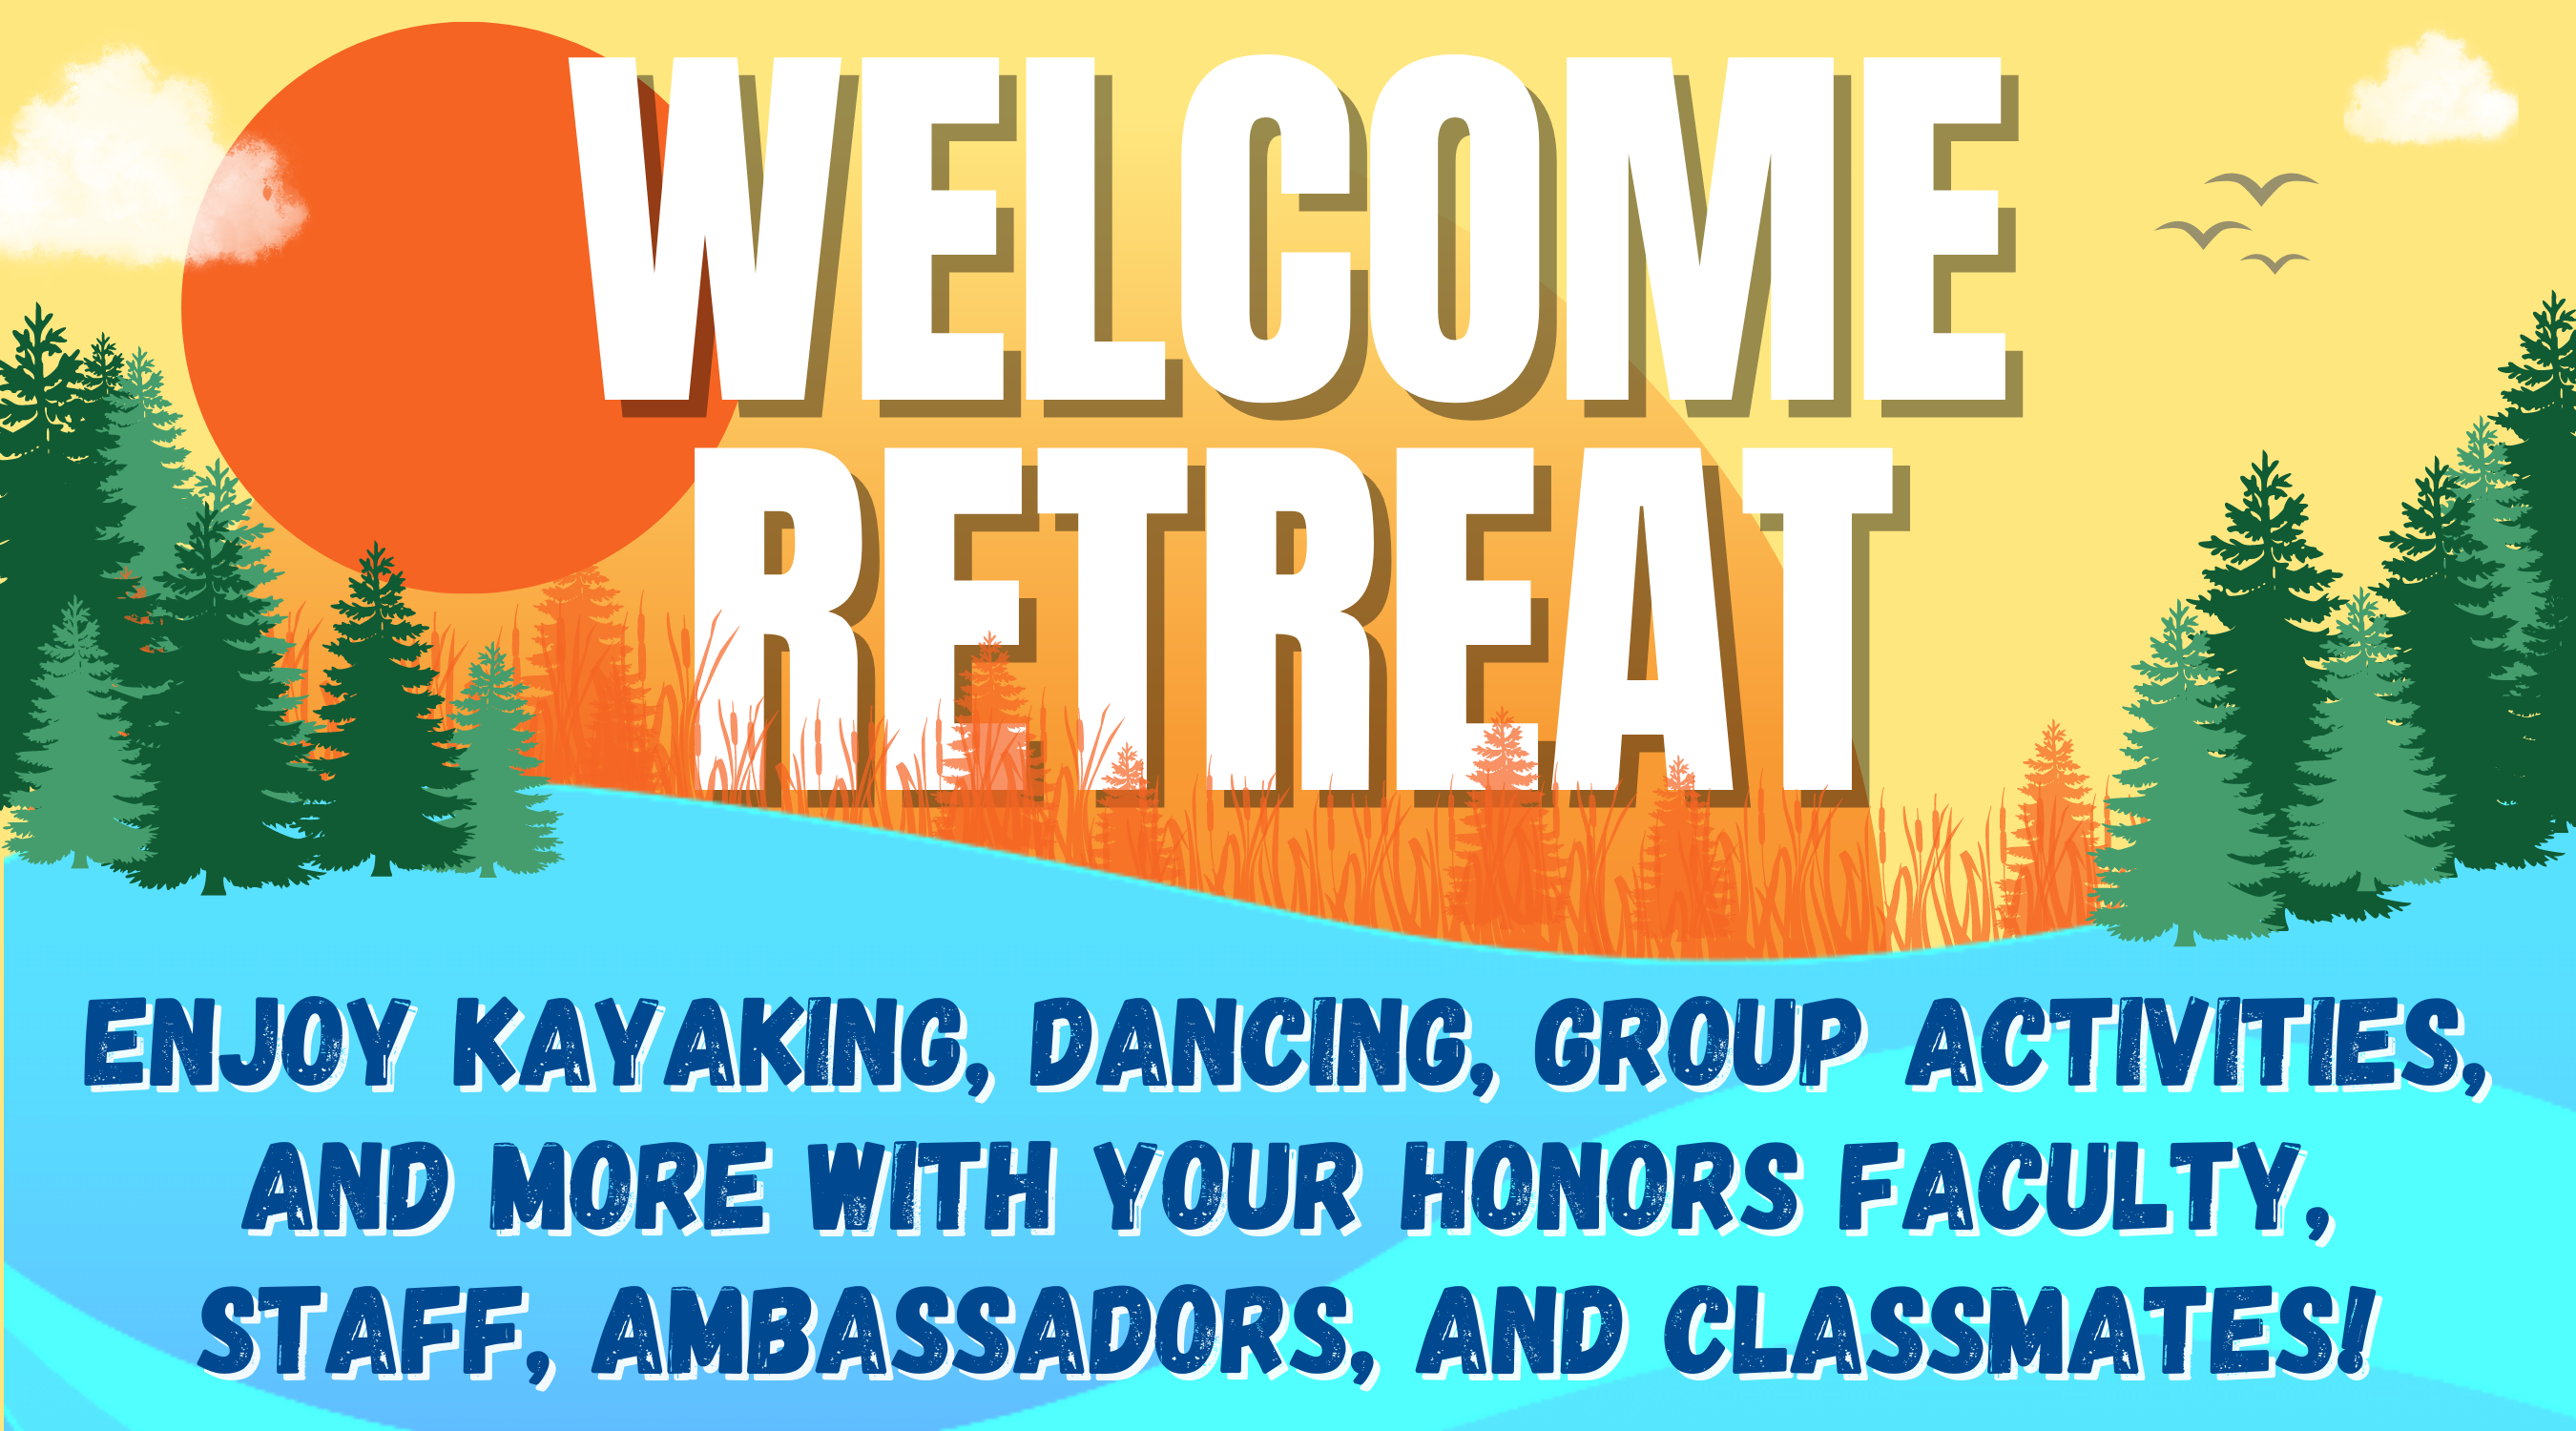 WELCOME RETREAT